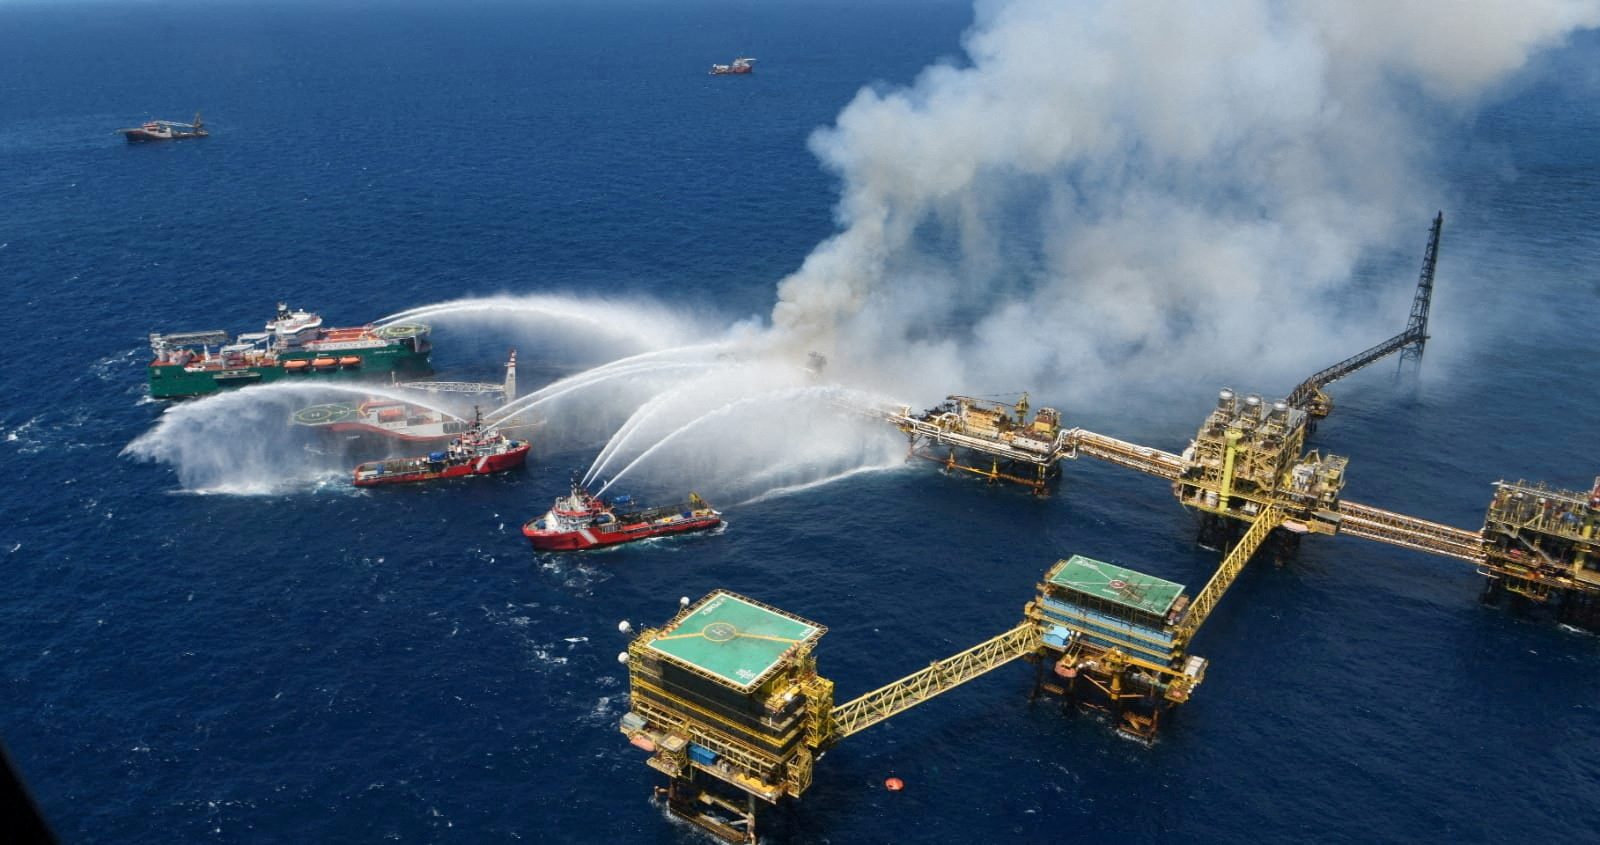 Two Killed as Fire Engulfs Mexican Oil Platform